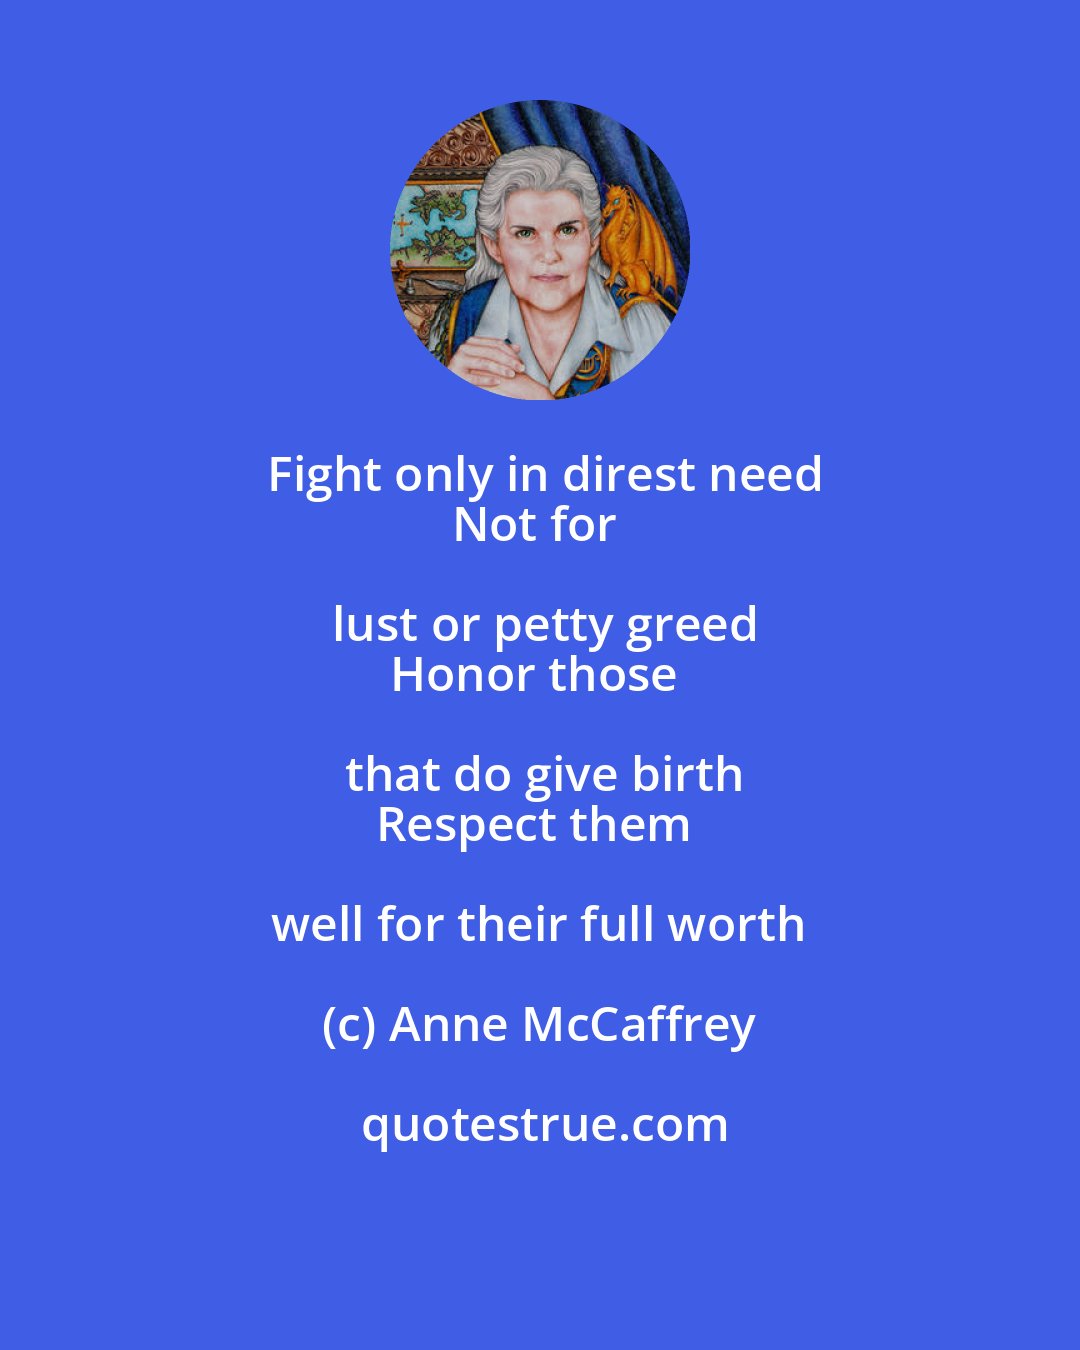 Anne McCaffrey: Fight only in direst need
Not for lust or petty greed
Honor those that do give birth
Respect them well for their full worth